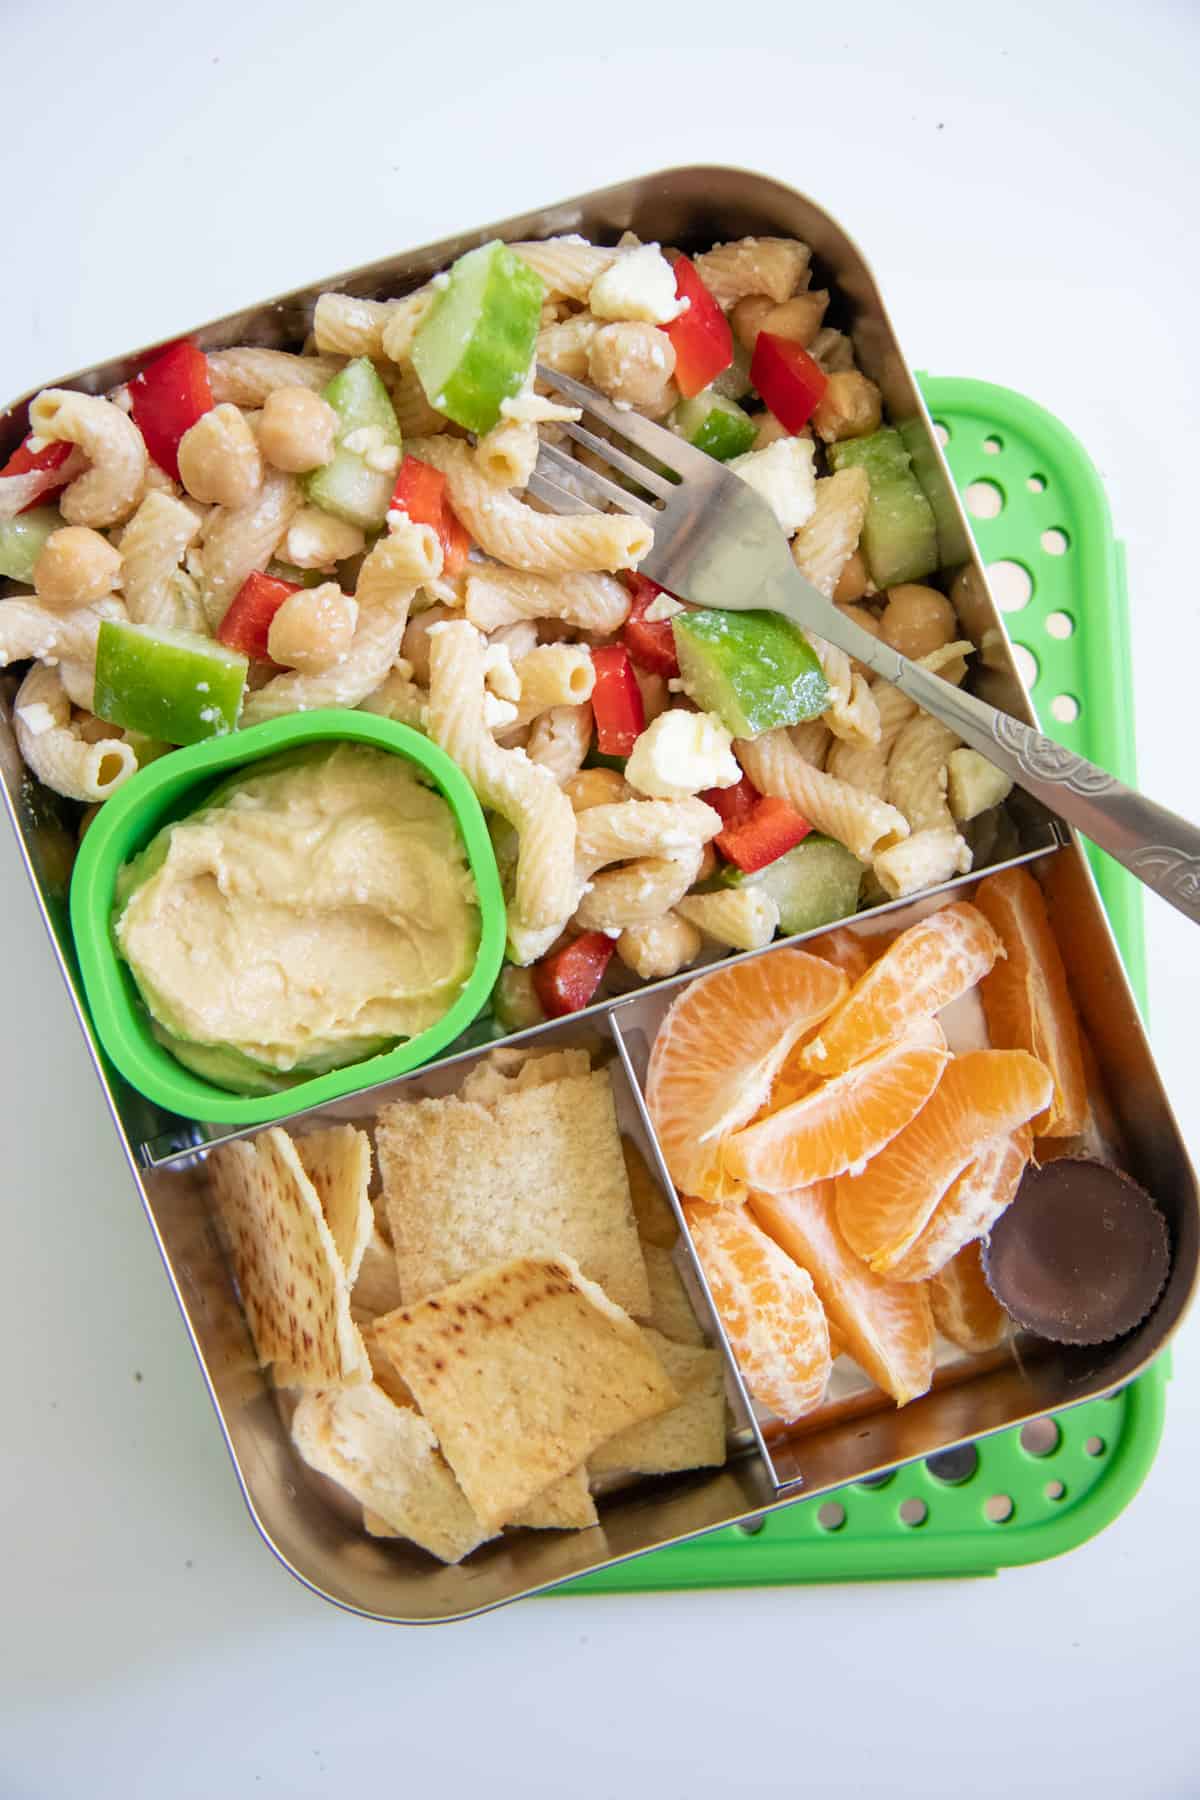 School Lunch Ideas: Stainless steel lunch box with Greek pasta salad, pita chips and hummus, and clementine slices.